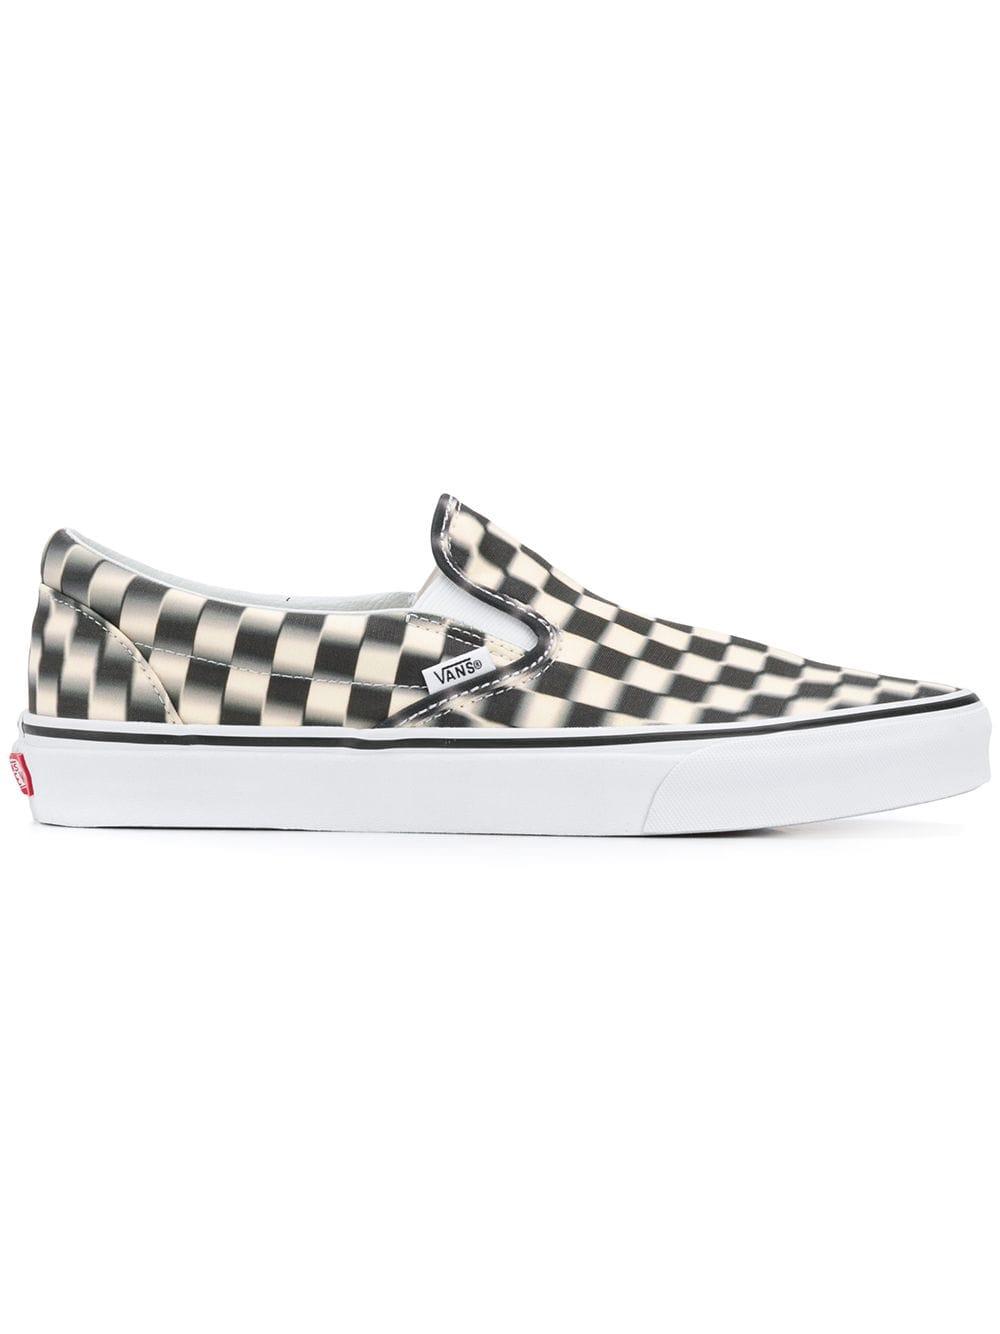 farvel Addition Odysseus Vans Canvas Classic Blur Check Slip On Sneakers in Black for Men - Lyst